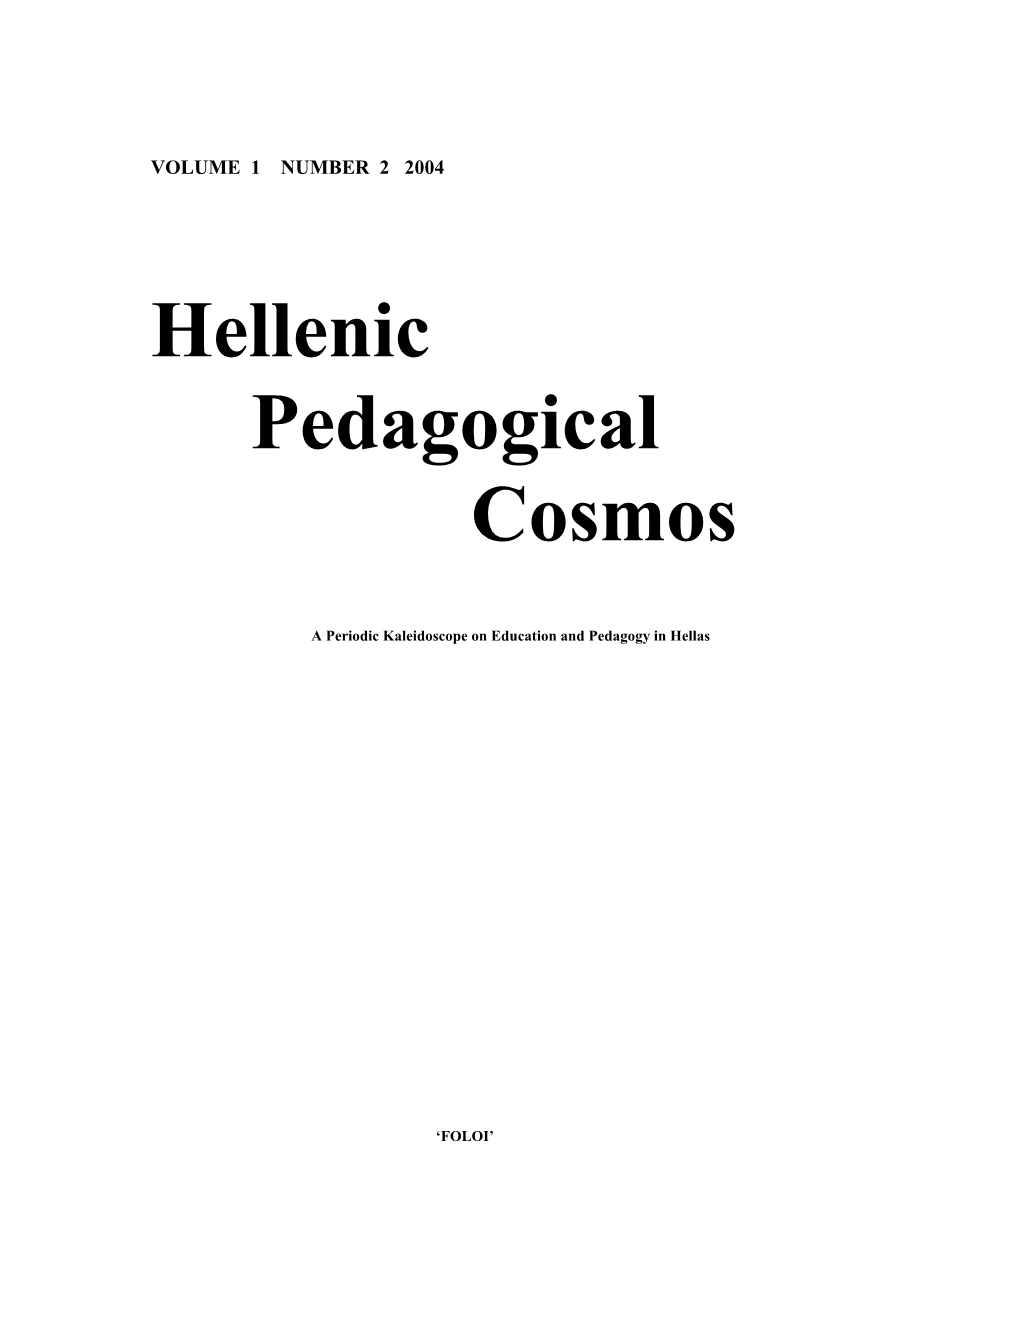 A Periodic Kaleidoscope on Education and Pedagogy in Hellas